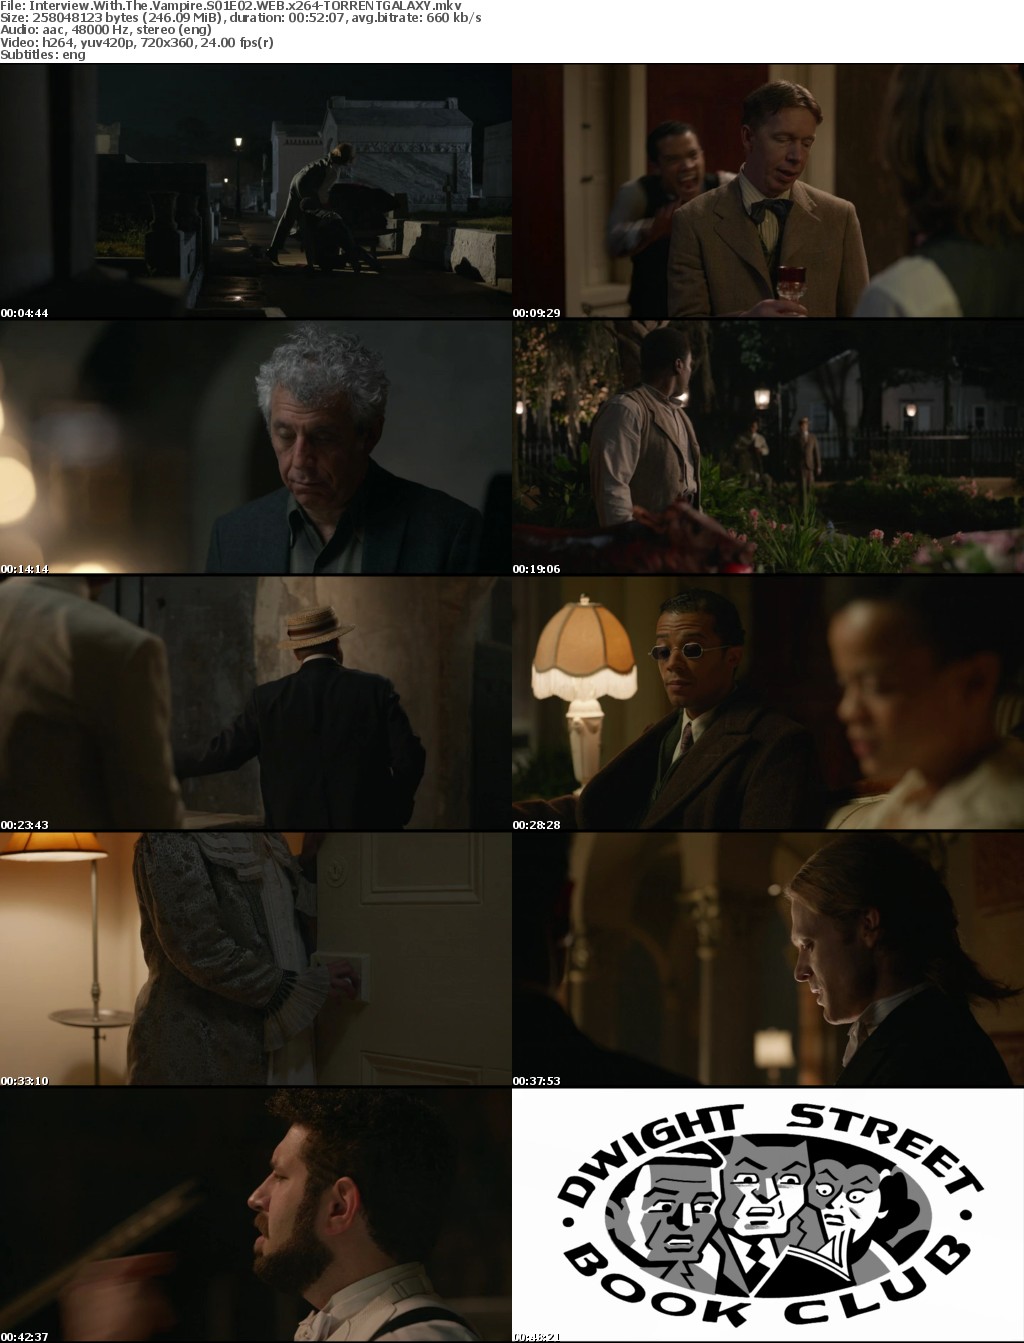 Interview With The Vampire S01E02 WEB x264-GALAXY